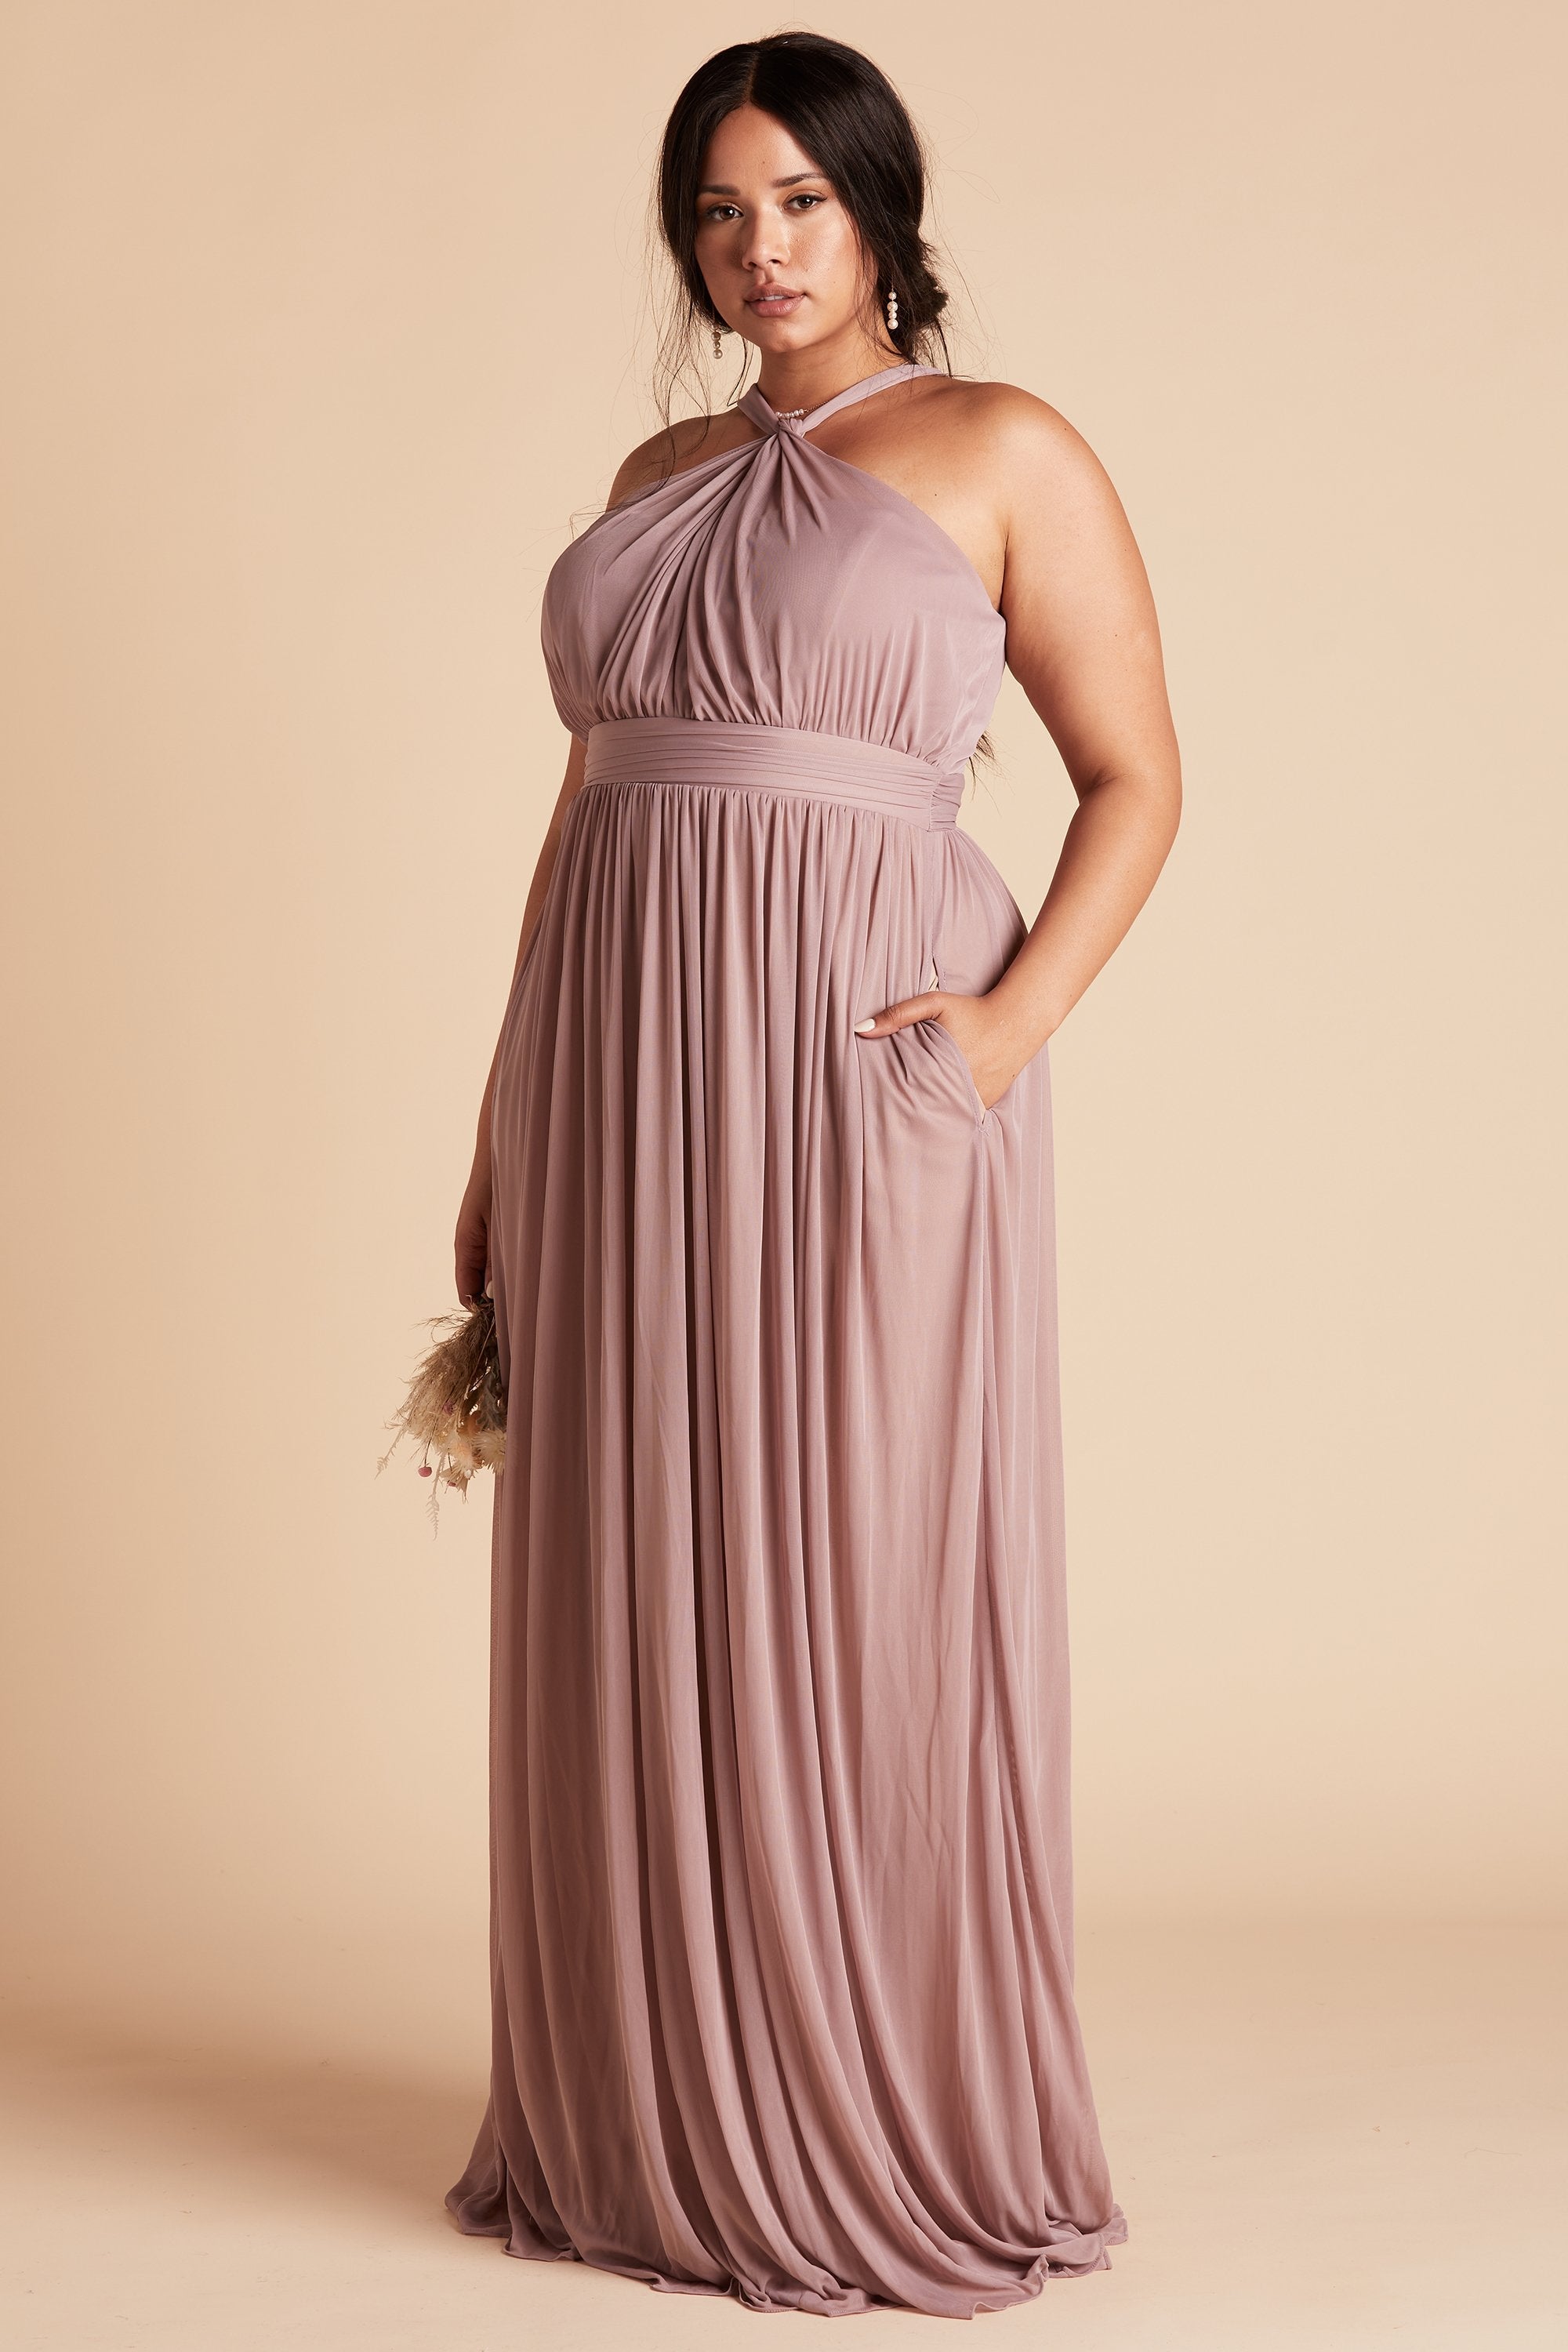 Kiko plus size bridesmaid dress in mauve pink chiffon by Birdy Grey, front view with hand in pocket